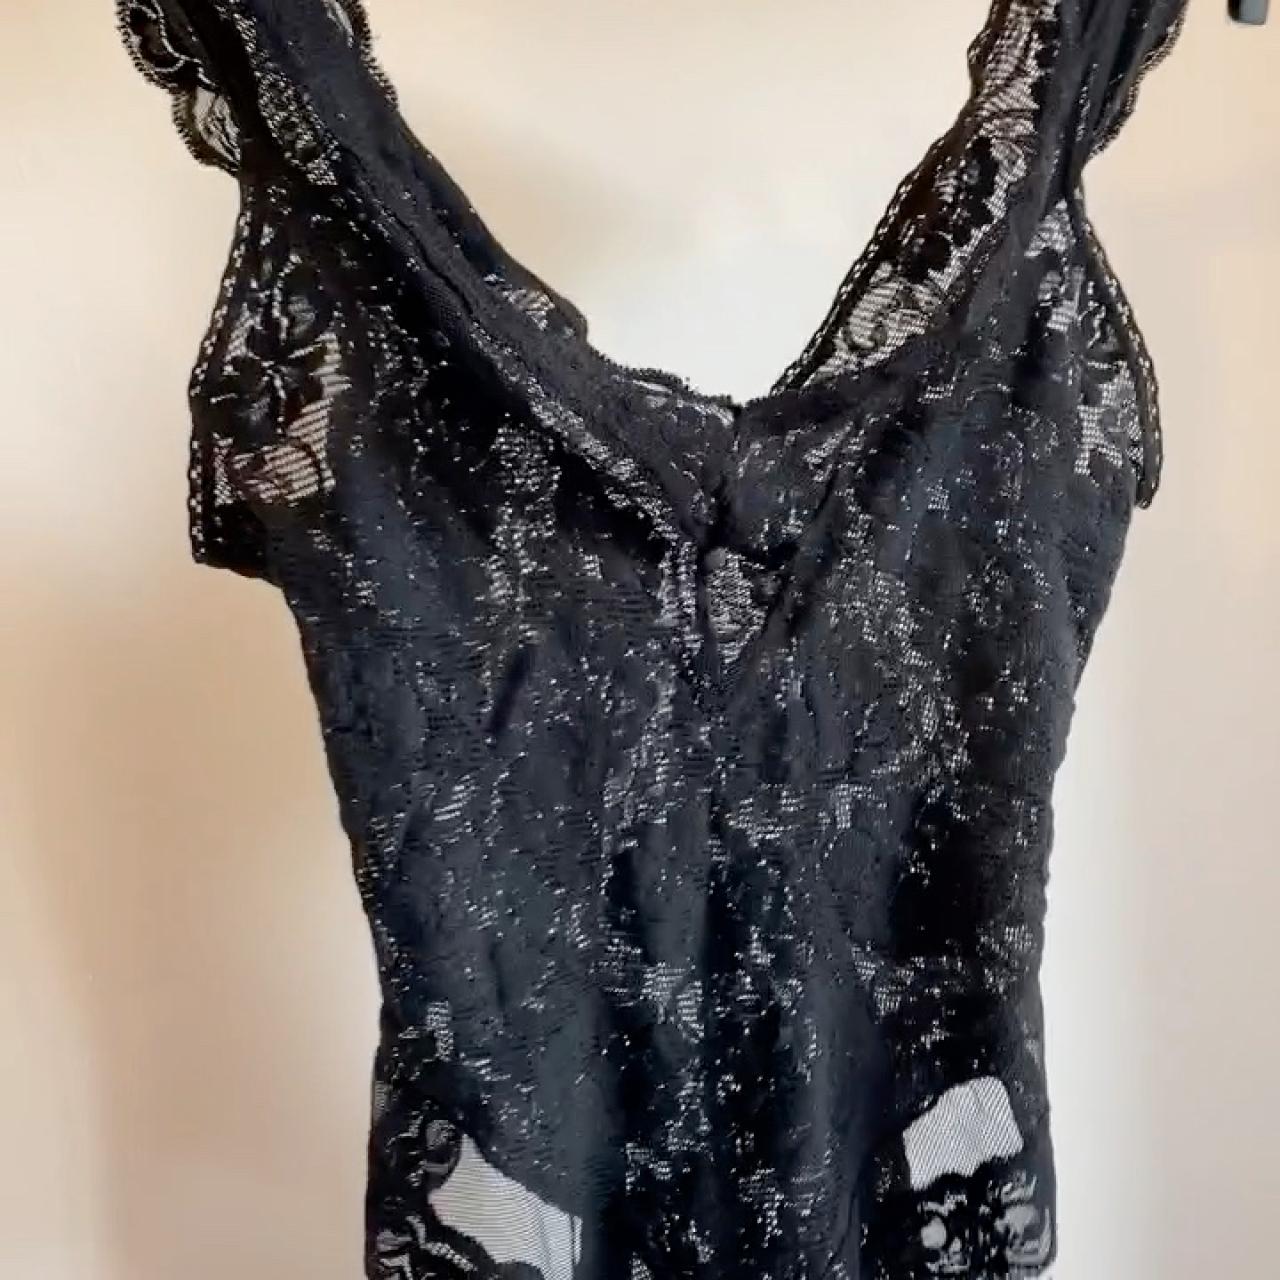 Sexy Lacey bodysuit - can be worn on a night out or... - Depop